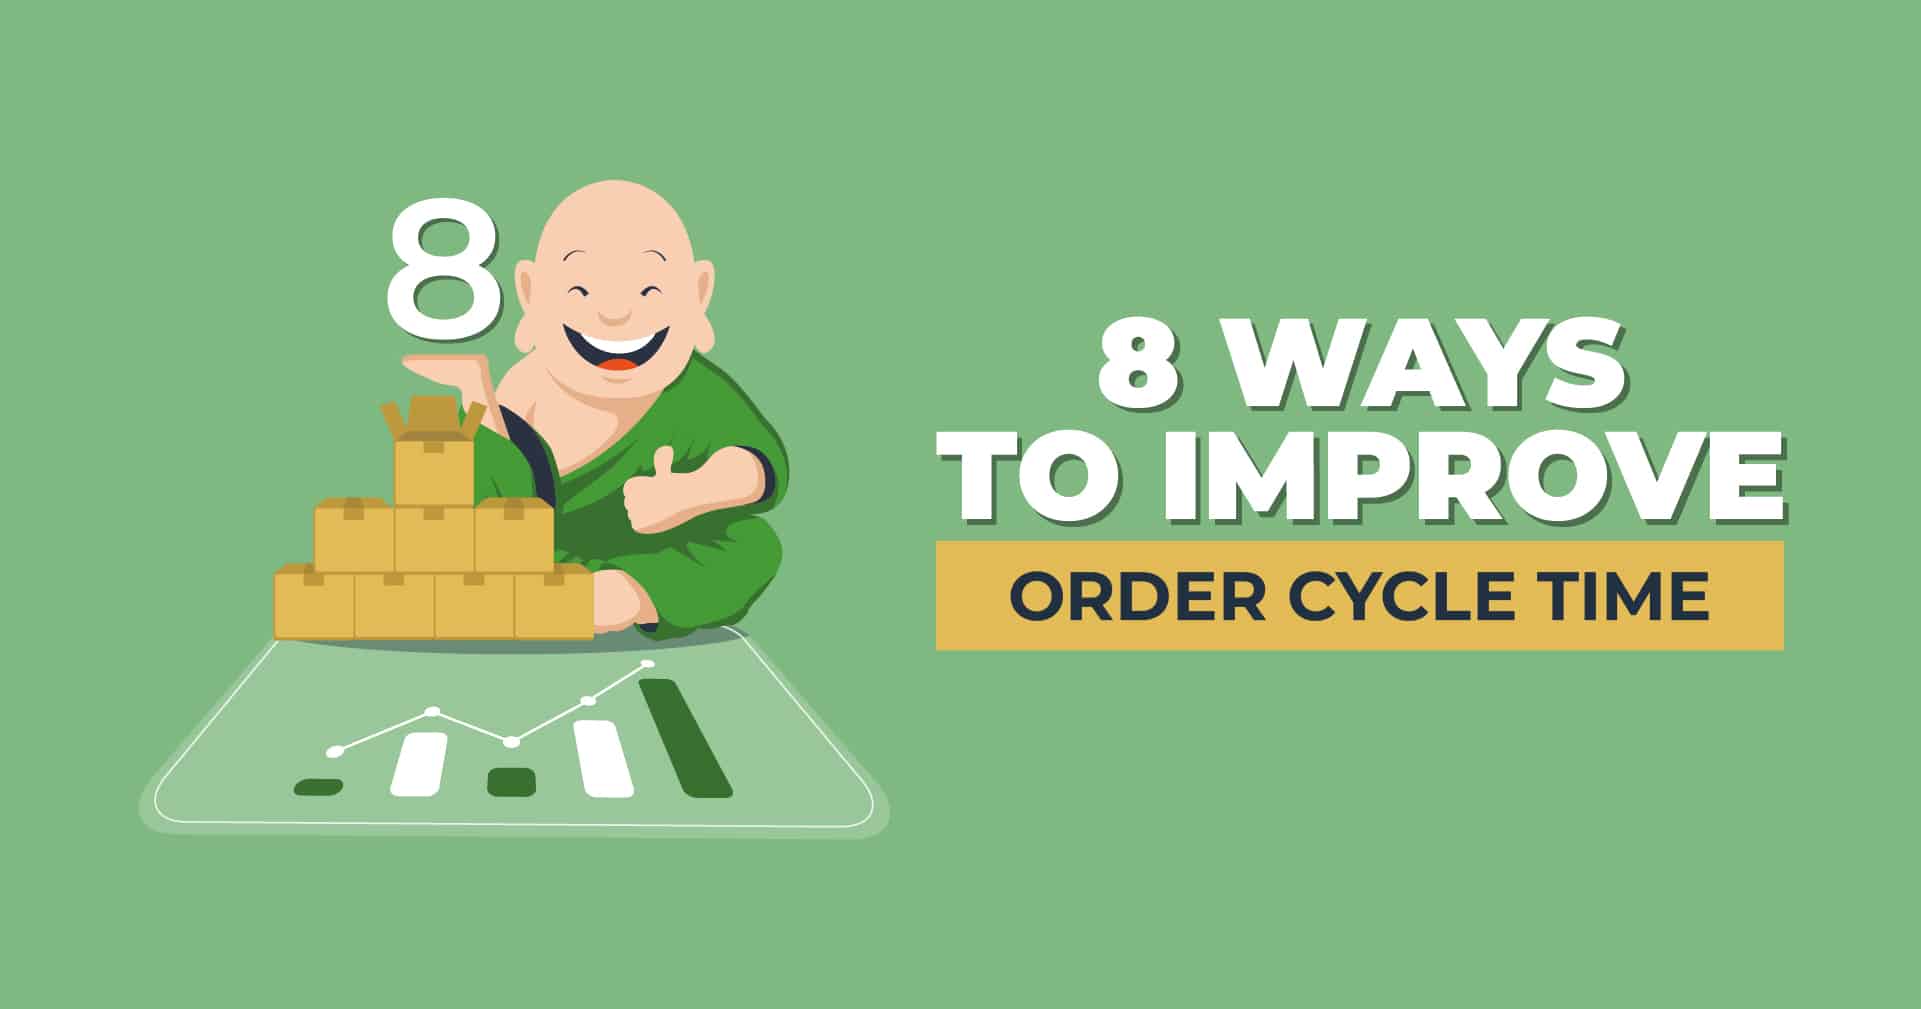 8 Ways to Improve Order Cycle Time